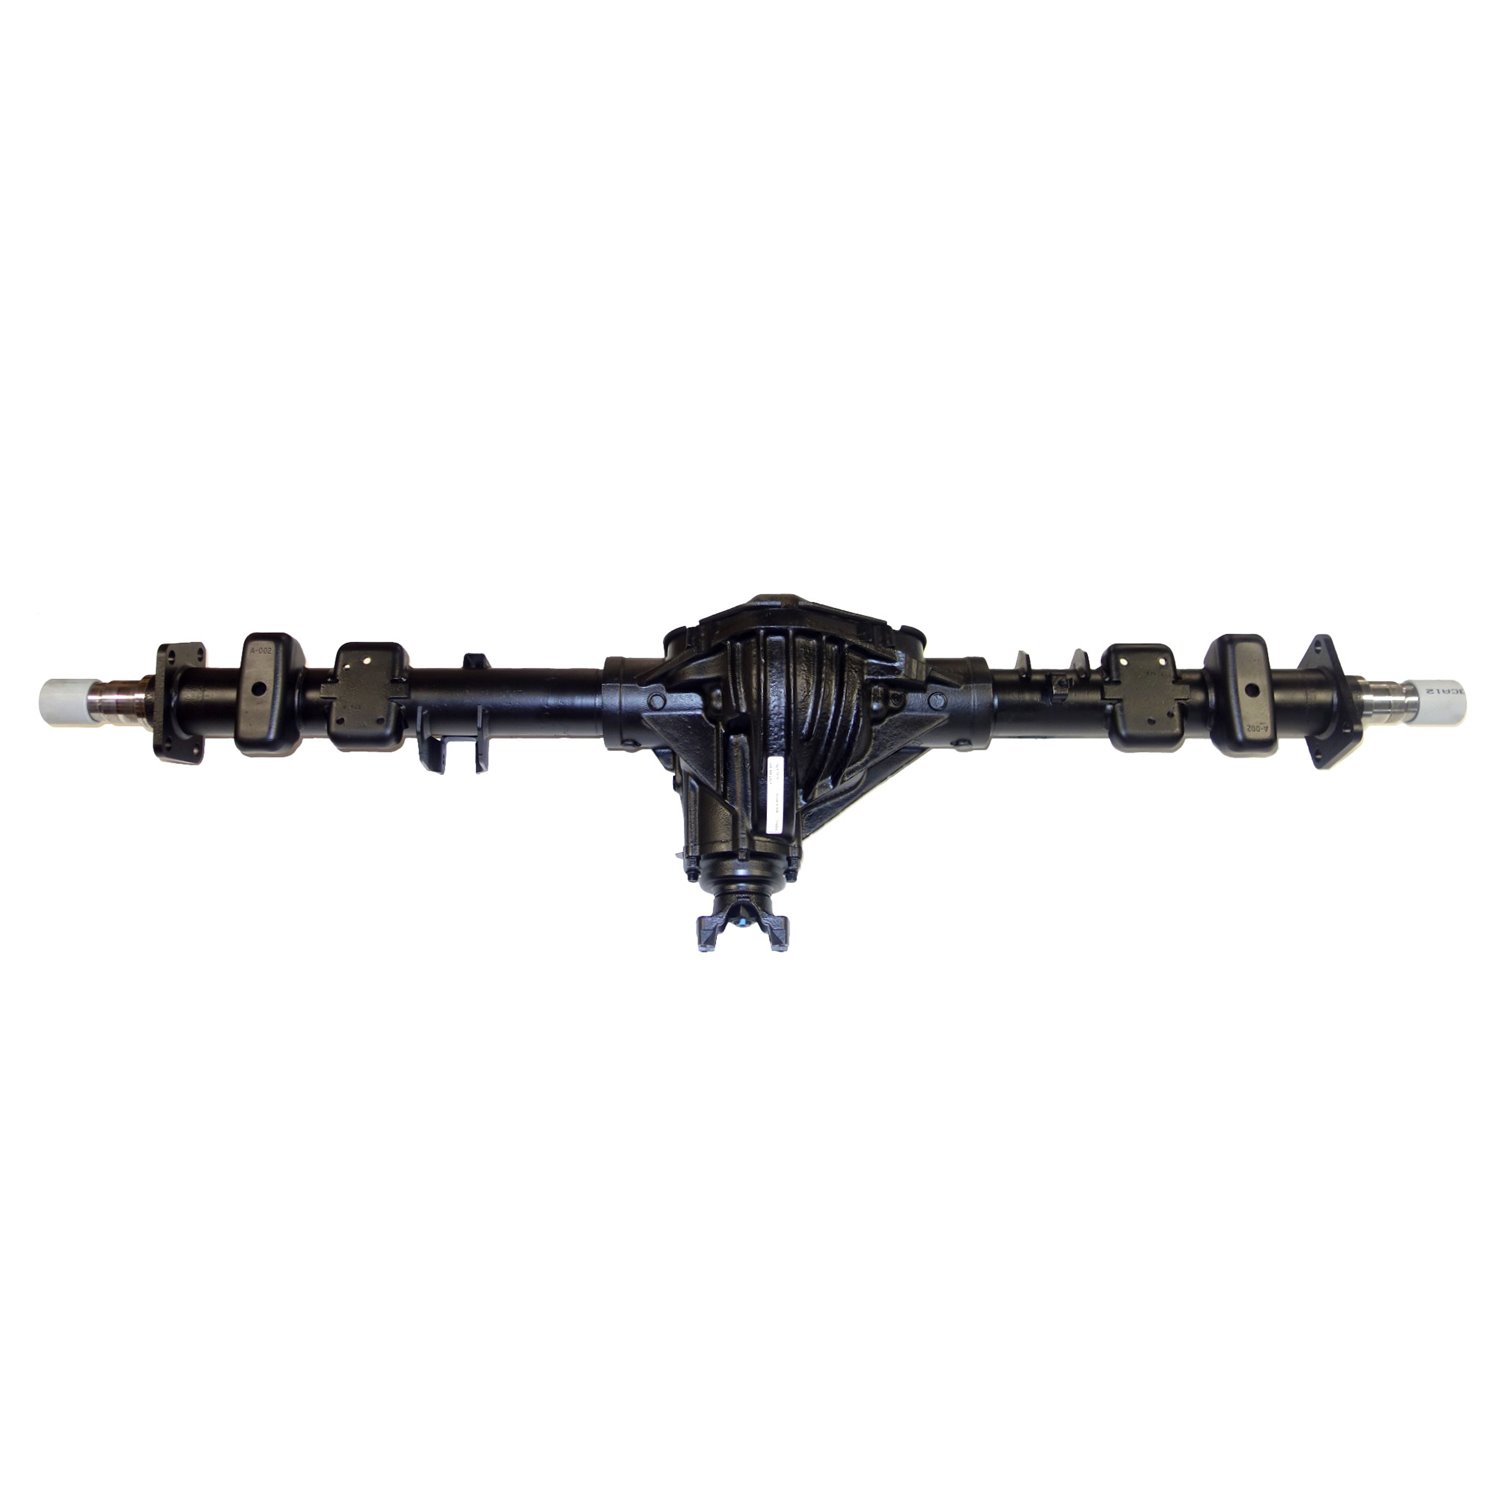 Remanufactured Axle Assy for GM 14 Bolt Truck 90-00 GM 3500, 4.11 DRW w/o Wide Track